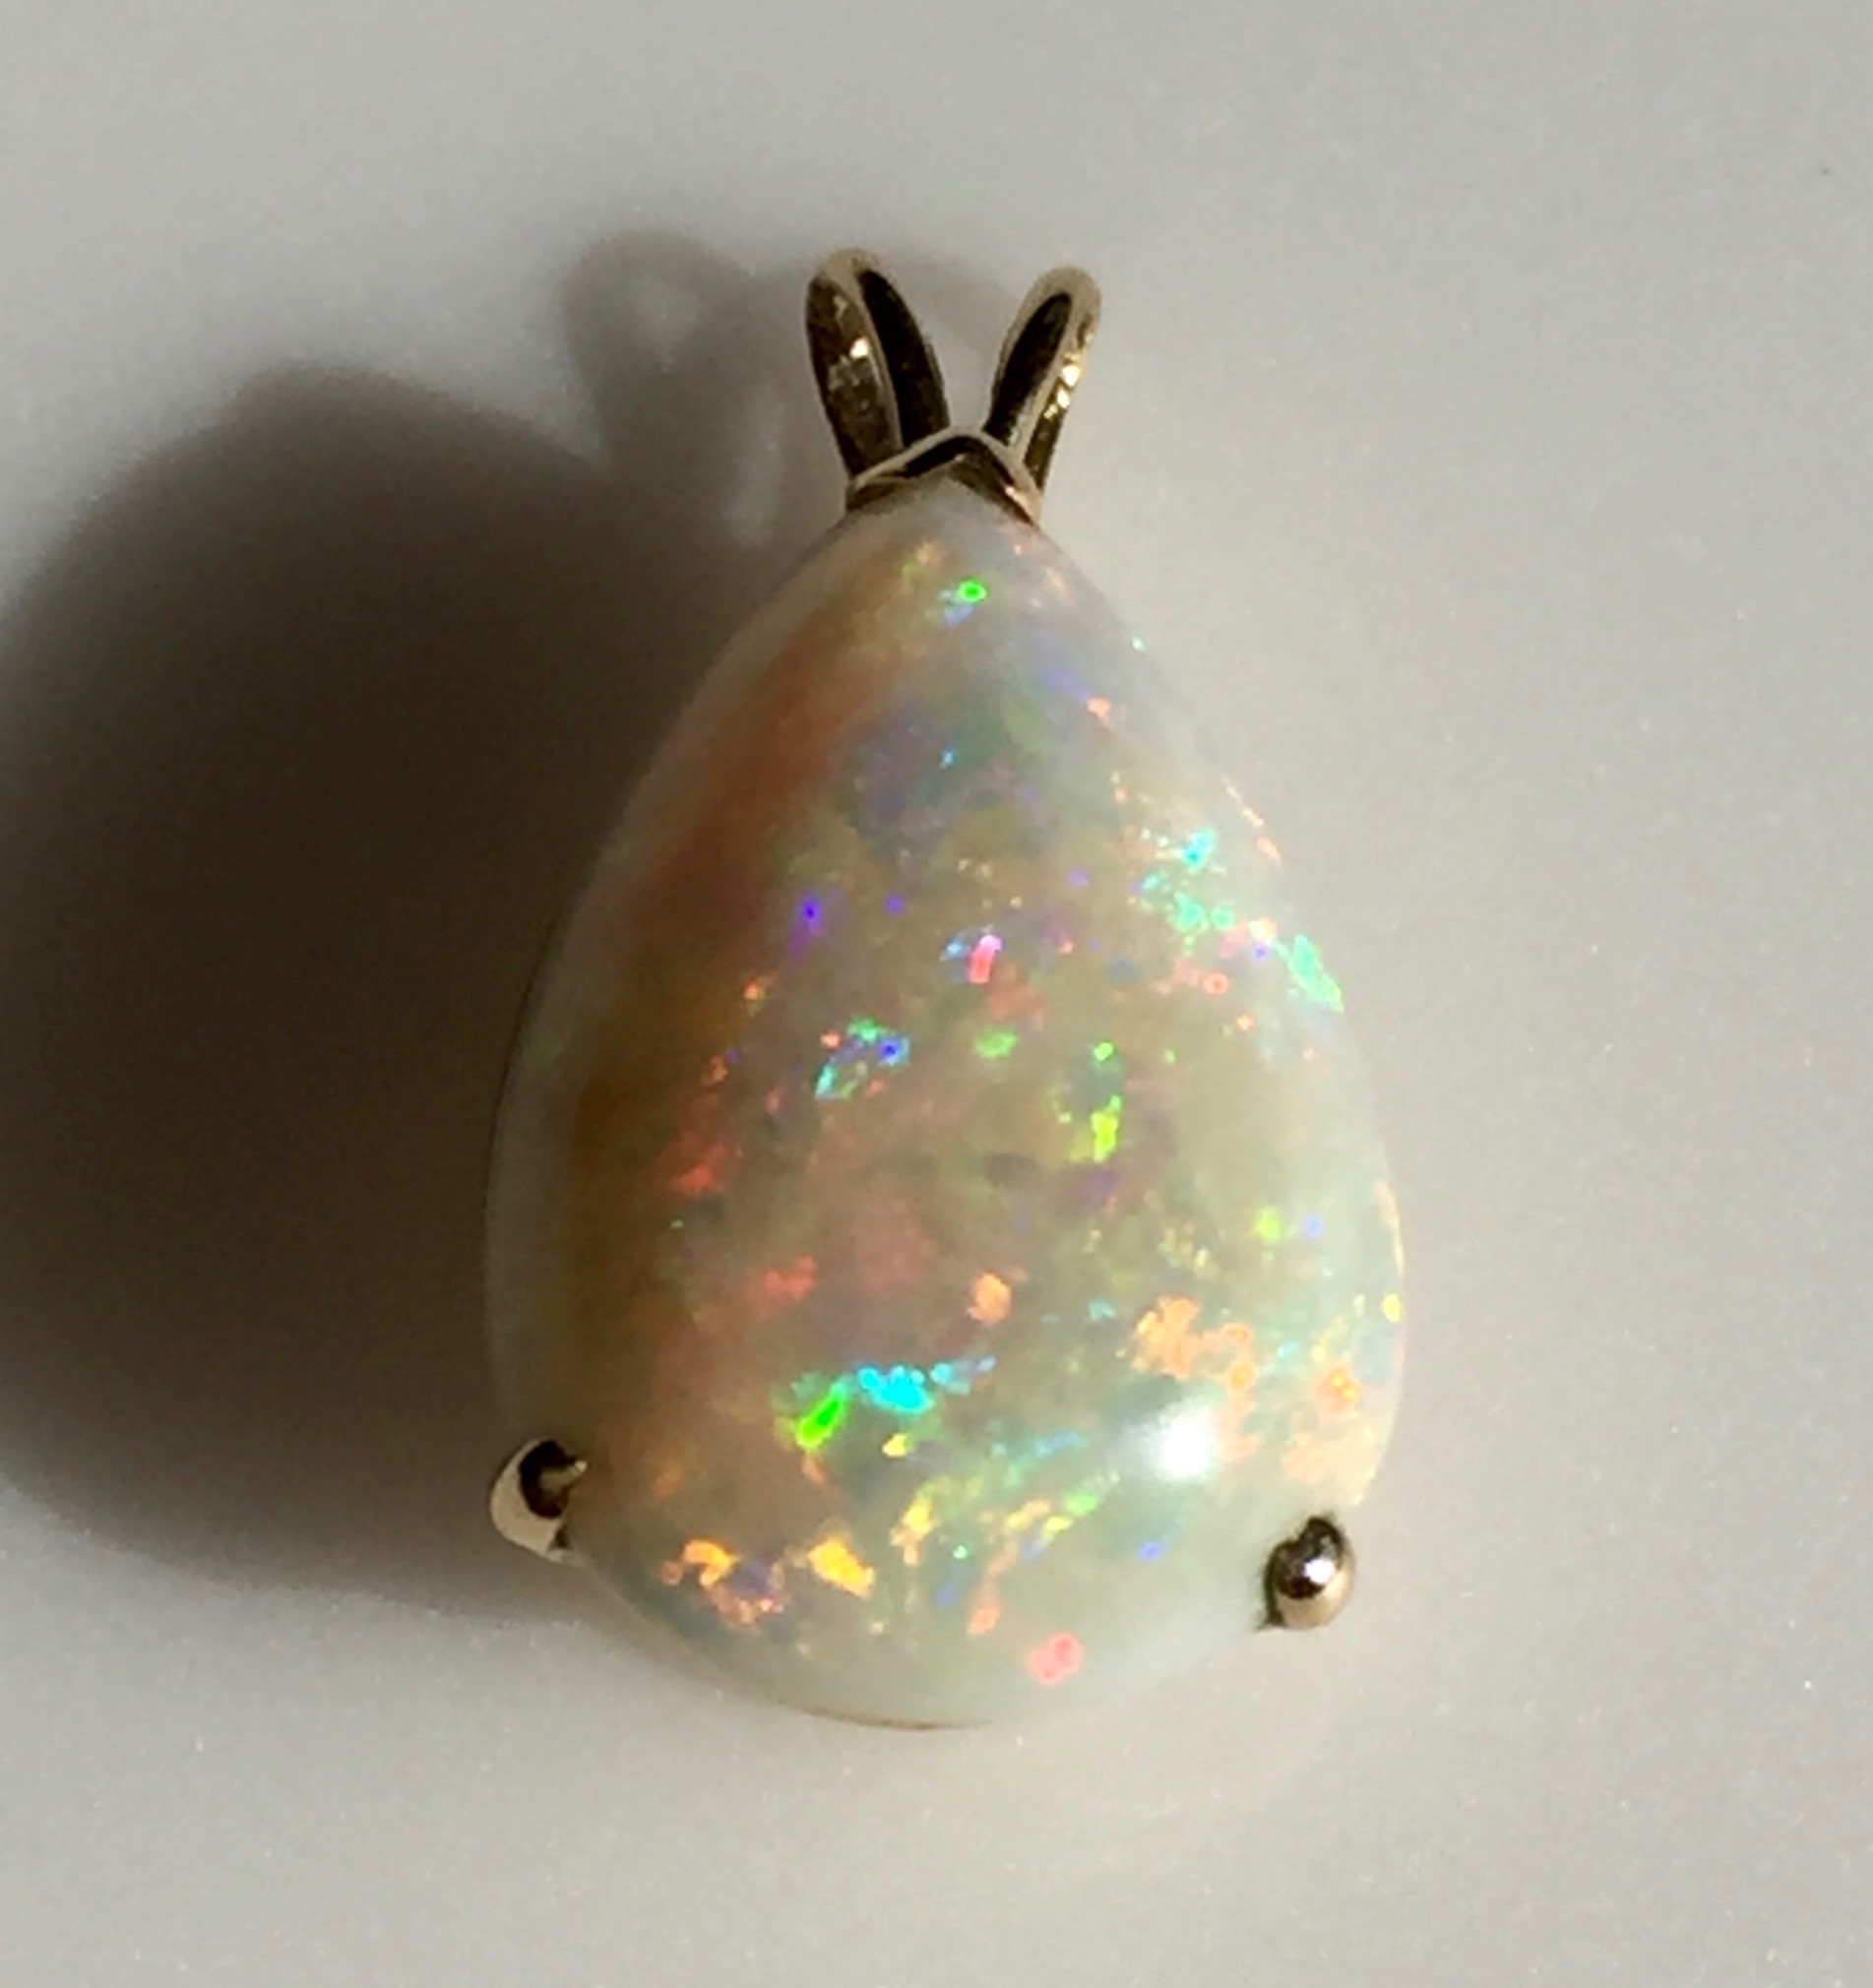 The Opal – Yet More Jewelry